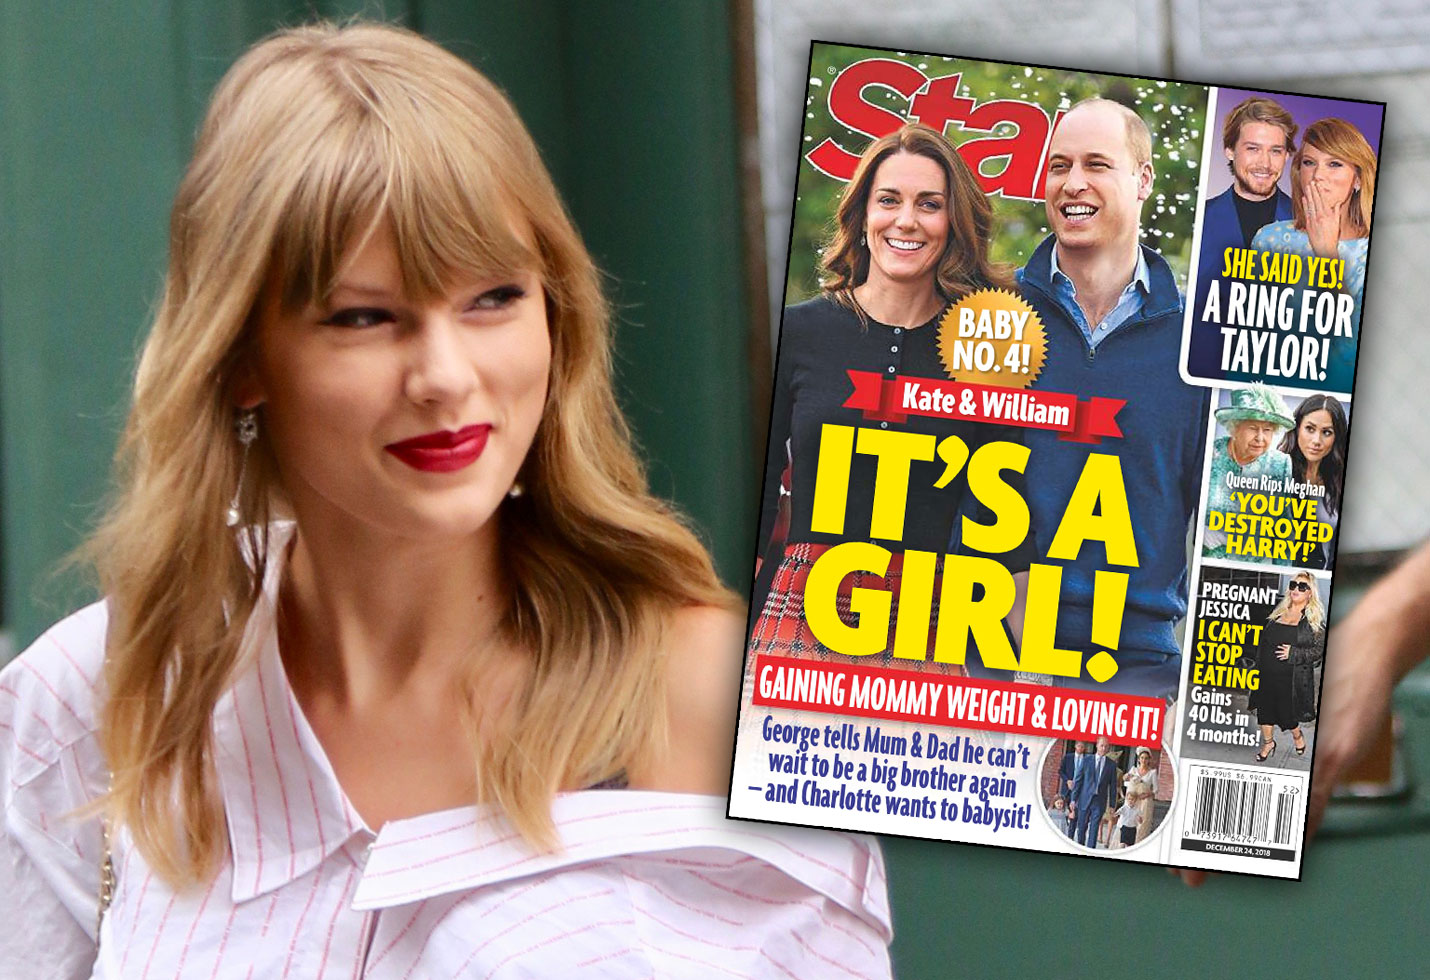 Taylor Swift Joe Alwyn Could Be Engaged By 2019